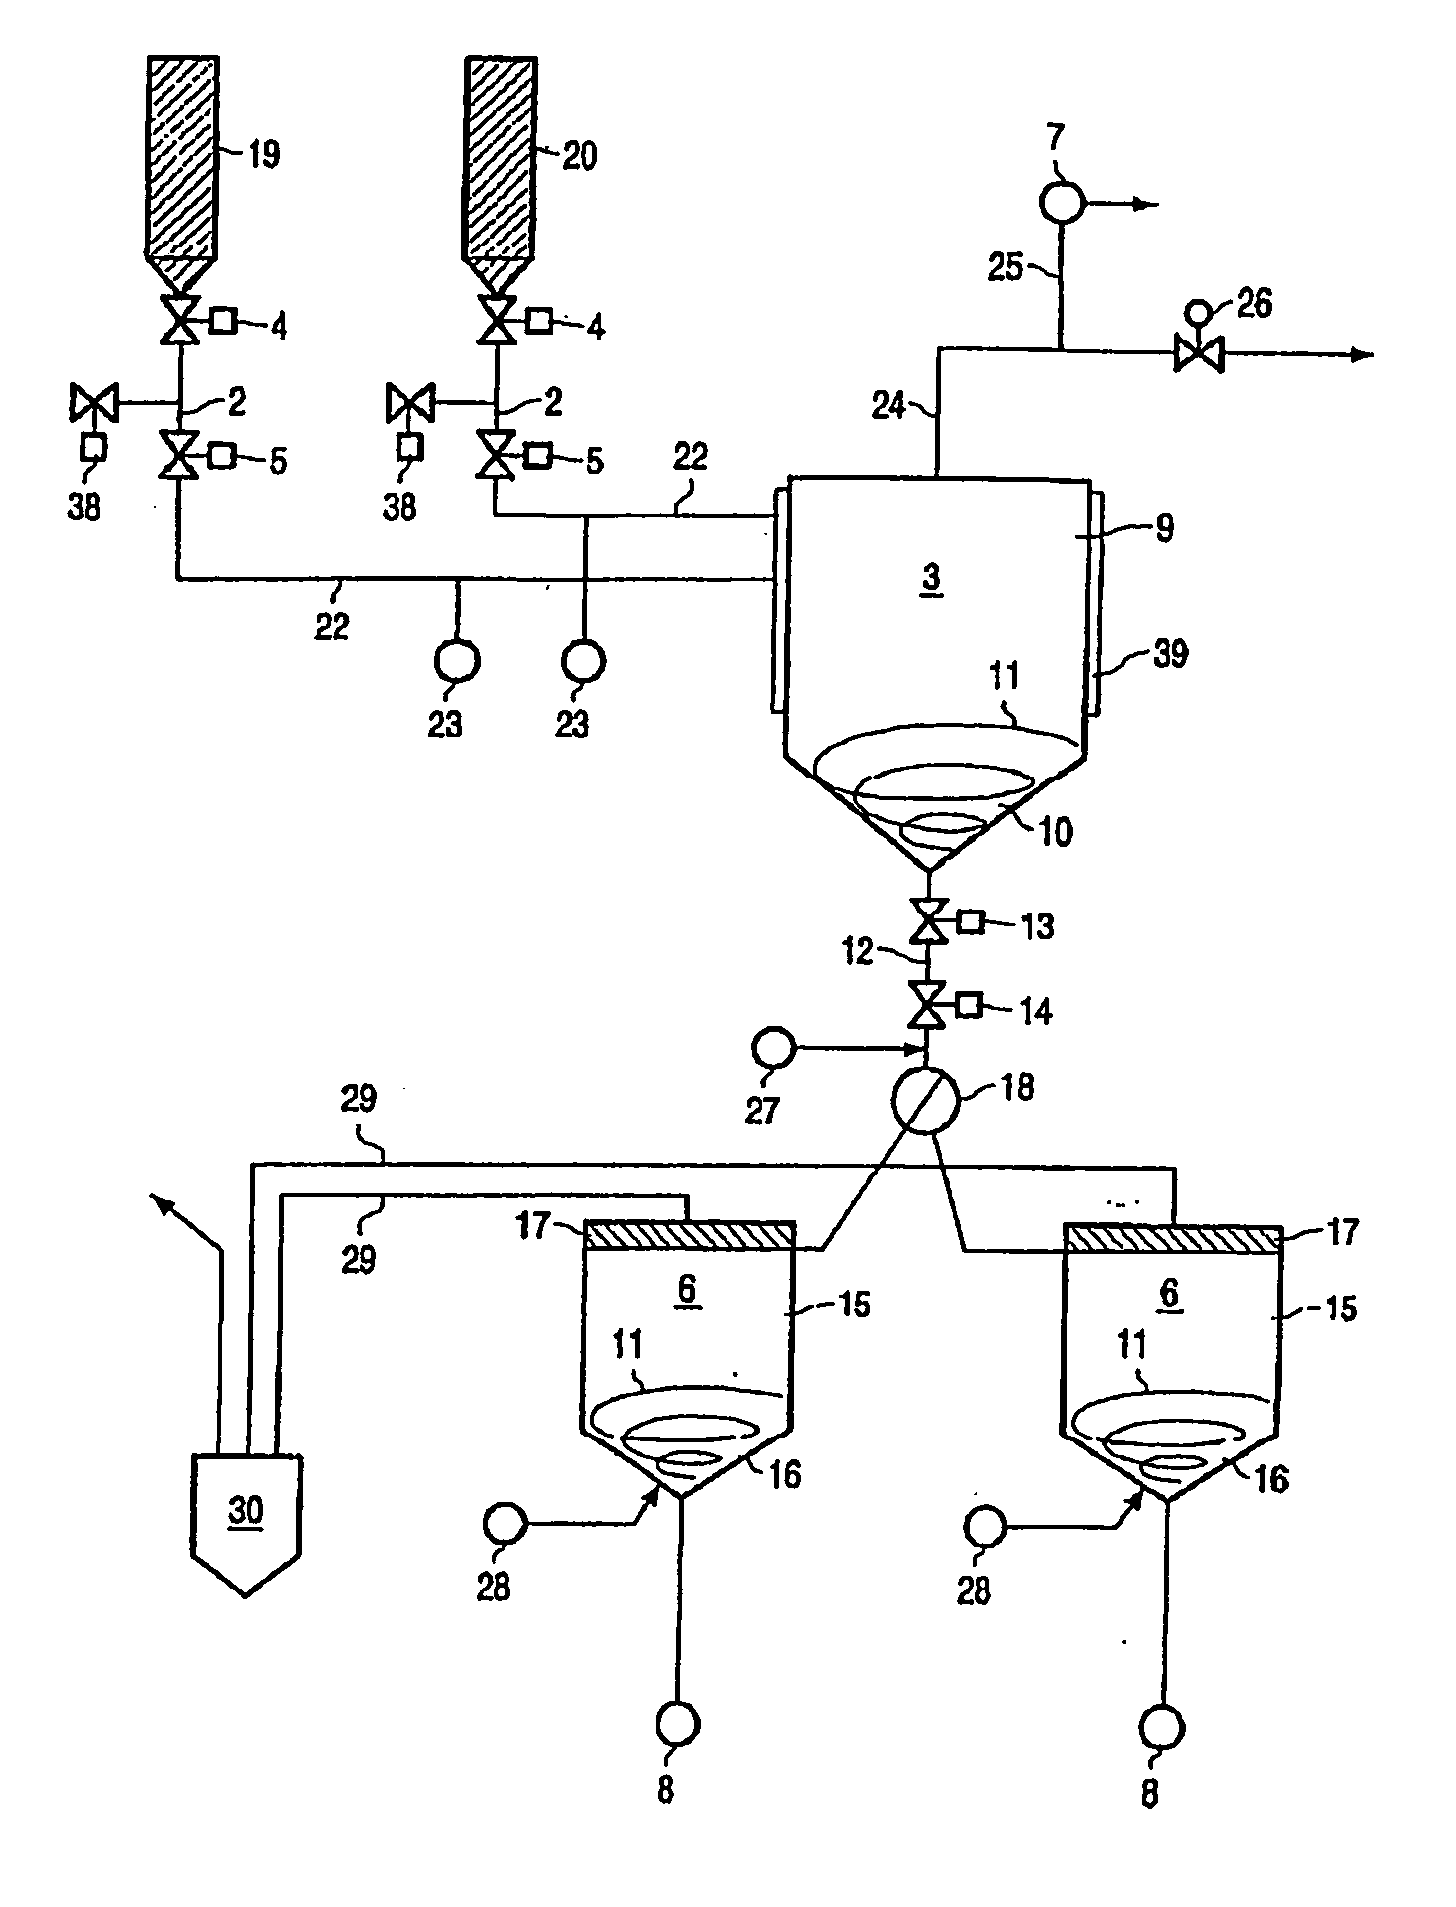 Method for improving a polymerization reaction by taking out and analysing a sample